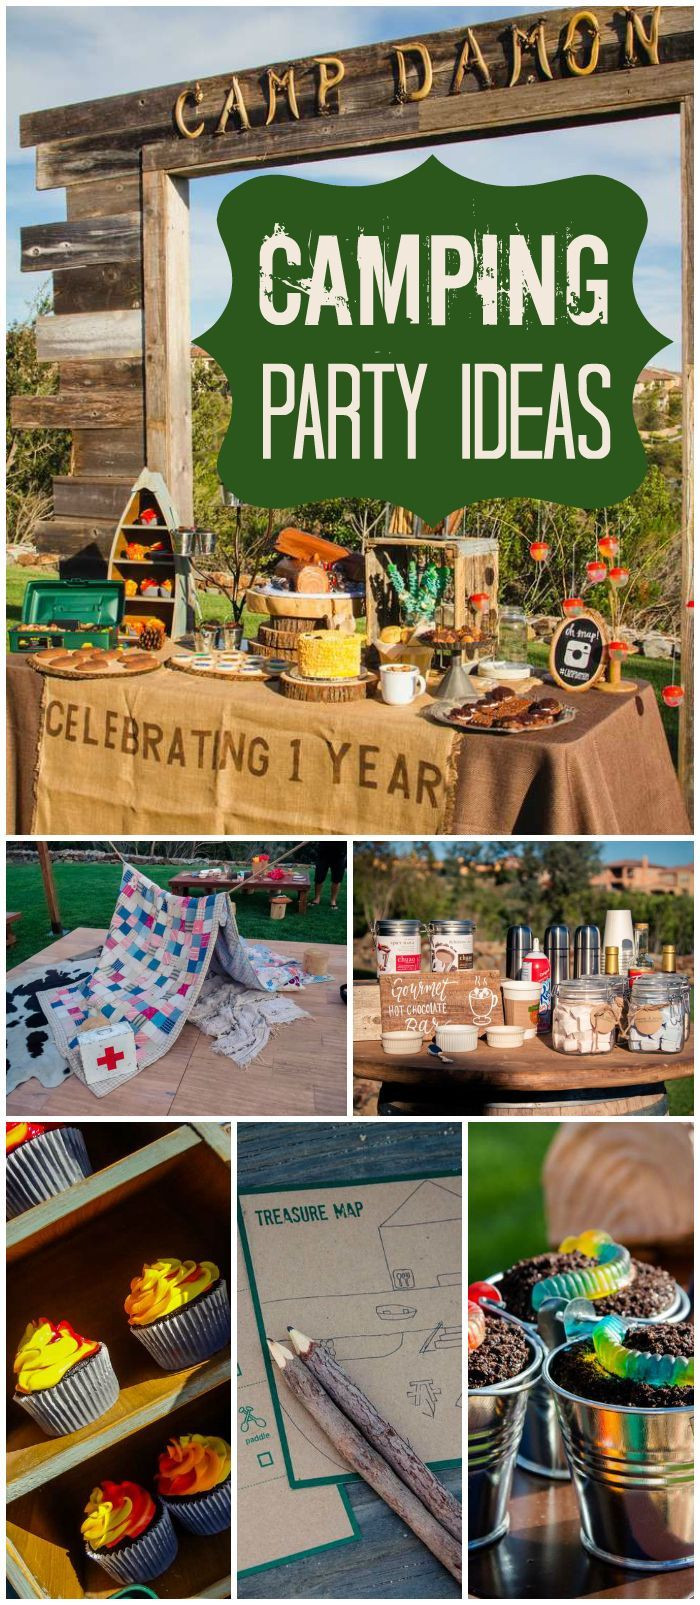 Cool Backyard Party Ideas
 How cool is this outdoor camping party with a s mores bar